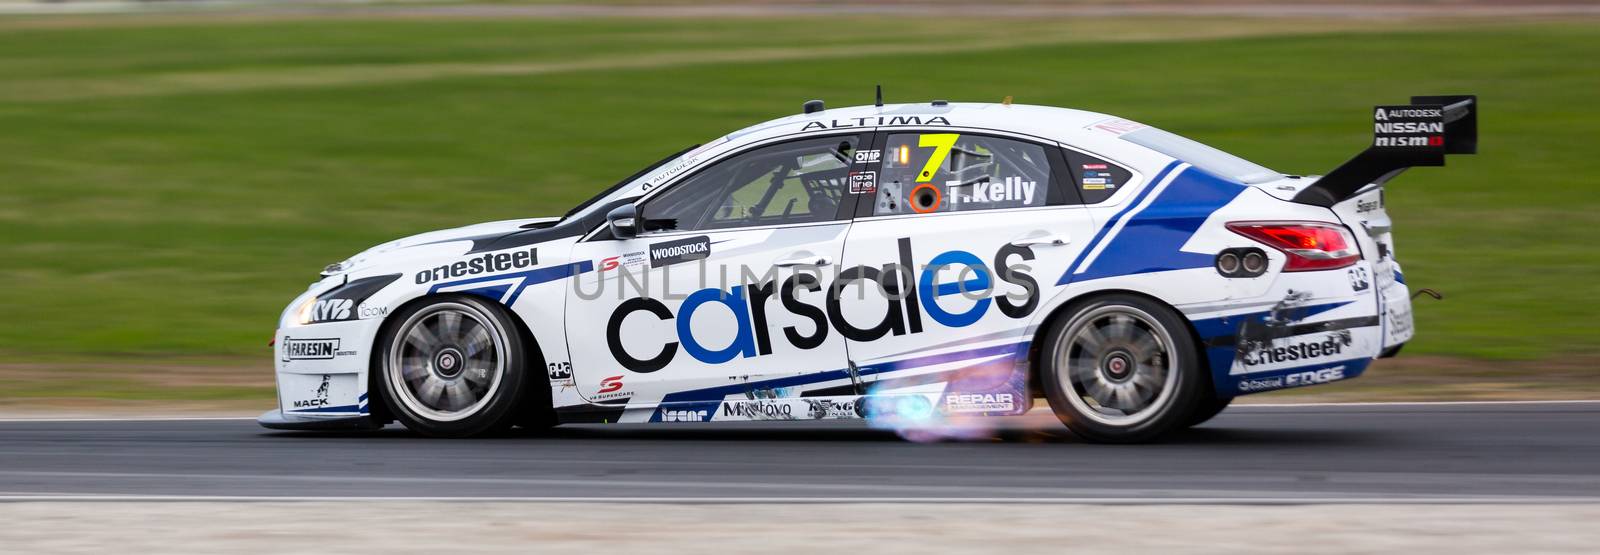 MELBOURNE, WINTON/AUSTRALIA, 22 MAY , 2016: Virgin Australia Supercars Championship  - Todd Kelly (Carslaes Racing) spitting fire during Race 10 at Winton.